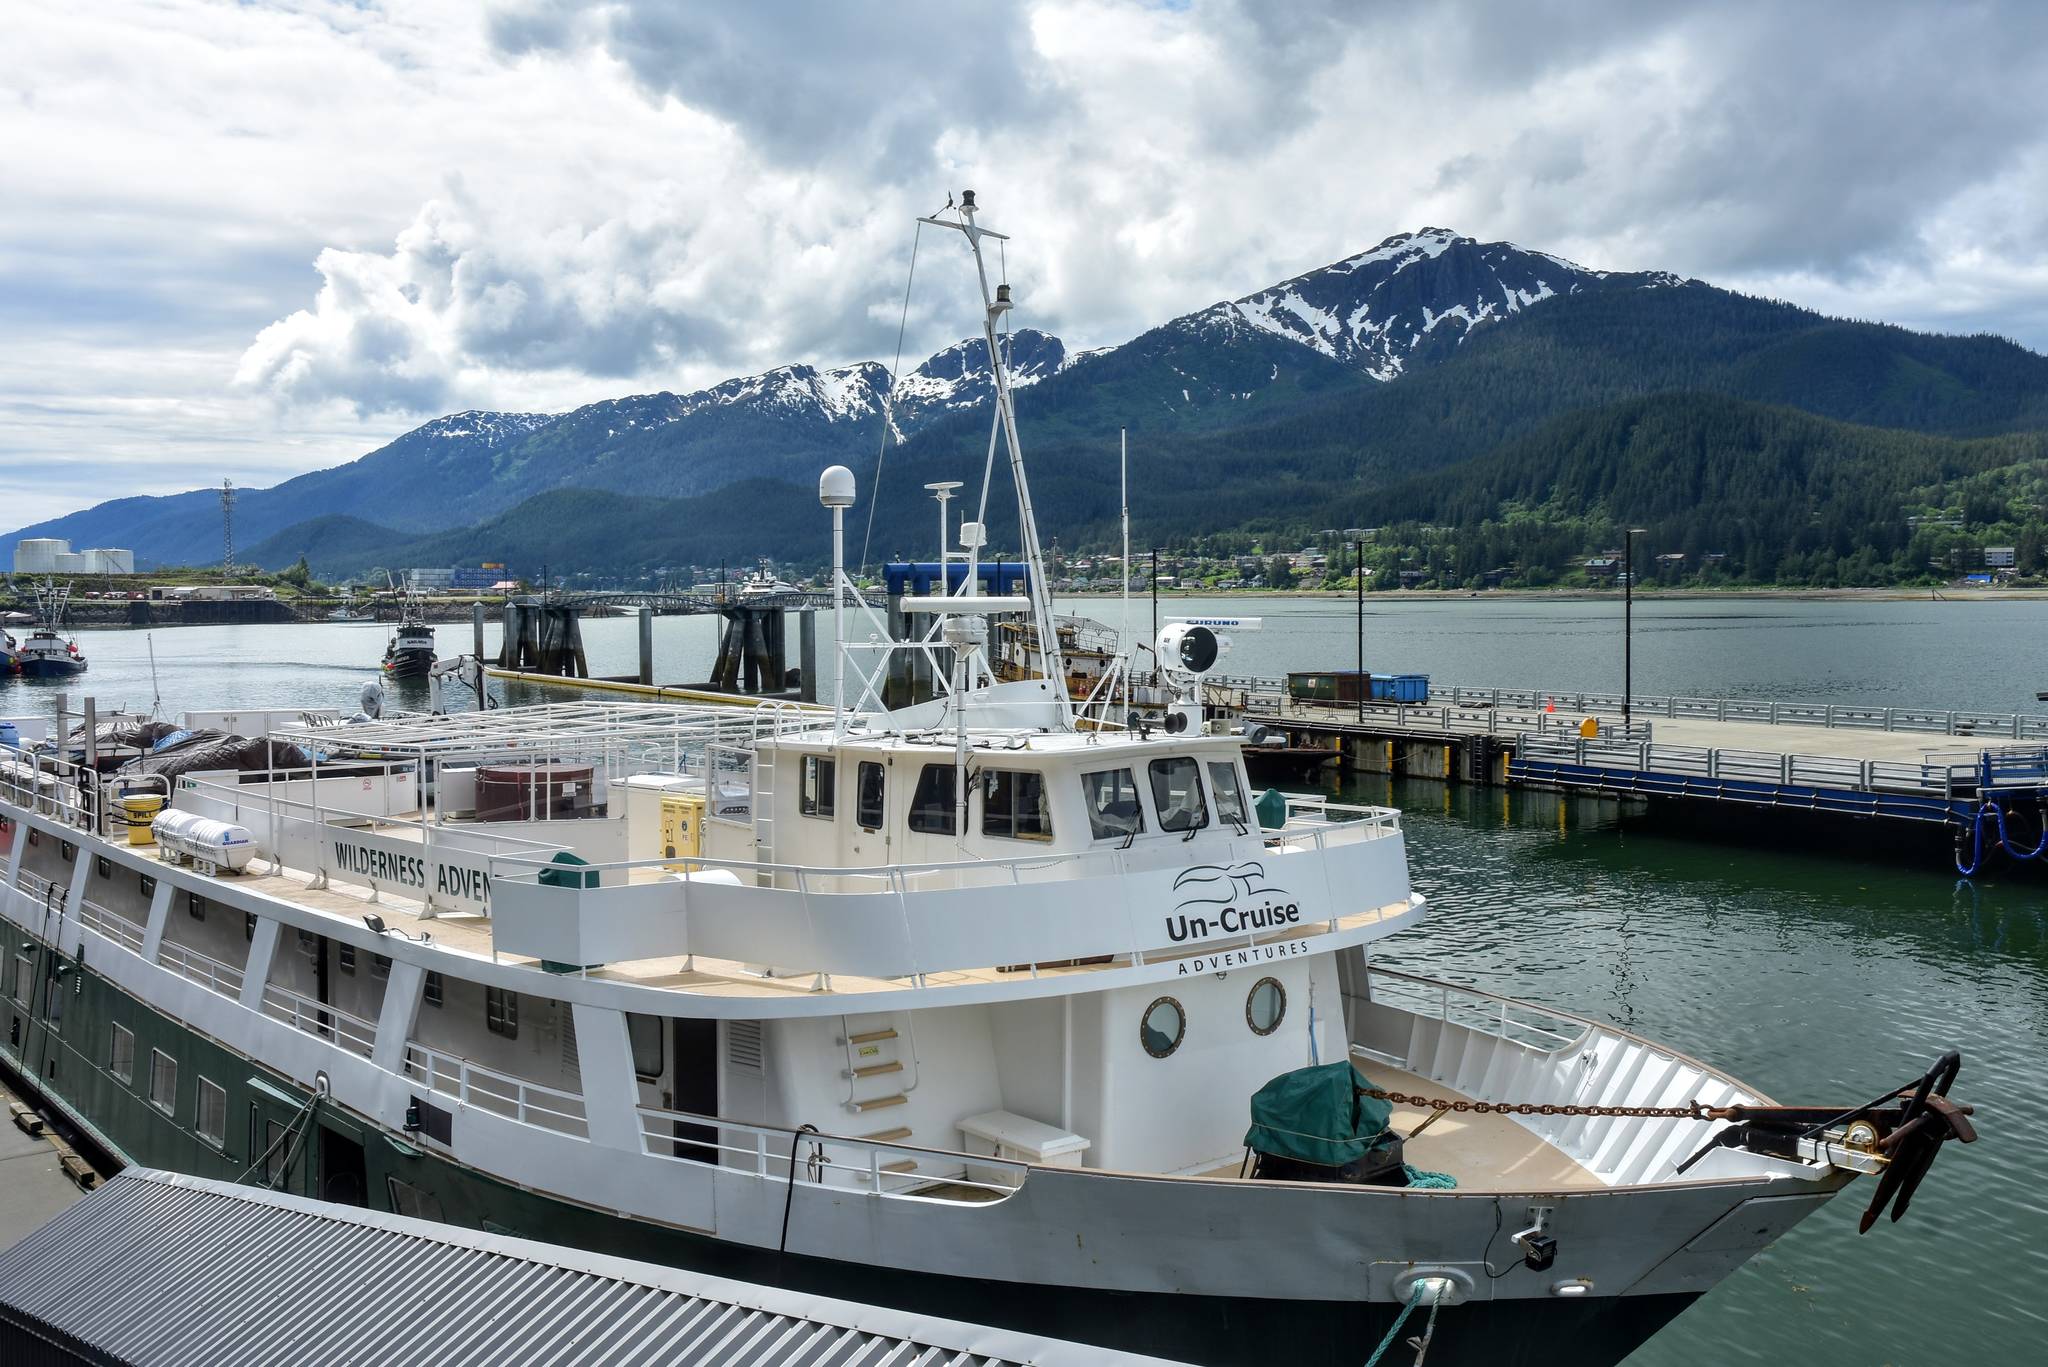 Peter Segall | Juneau Empire                                 An UnCruise vessel sits tied up on Juneau’s waterfront on Monday, June 22, 2020. UnCruise and other small cruise ship lines are planning limited voyages to Alaska for the end of summer. That has some local officials worried about how they might handle a health crisis, and considering how they can boost the economy.